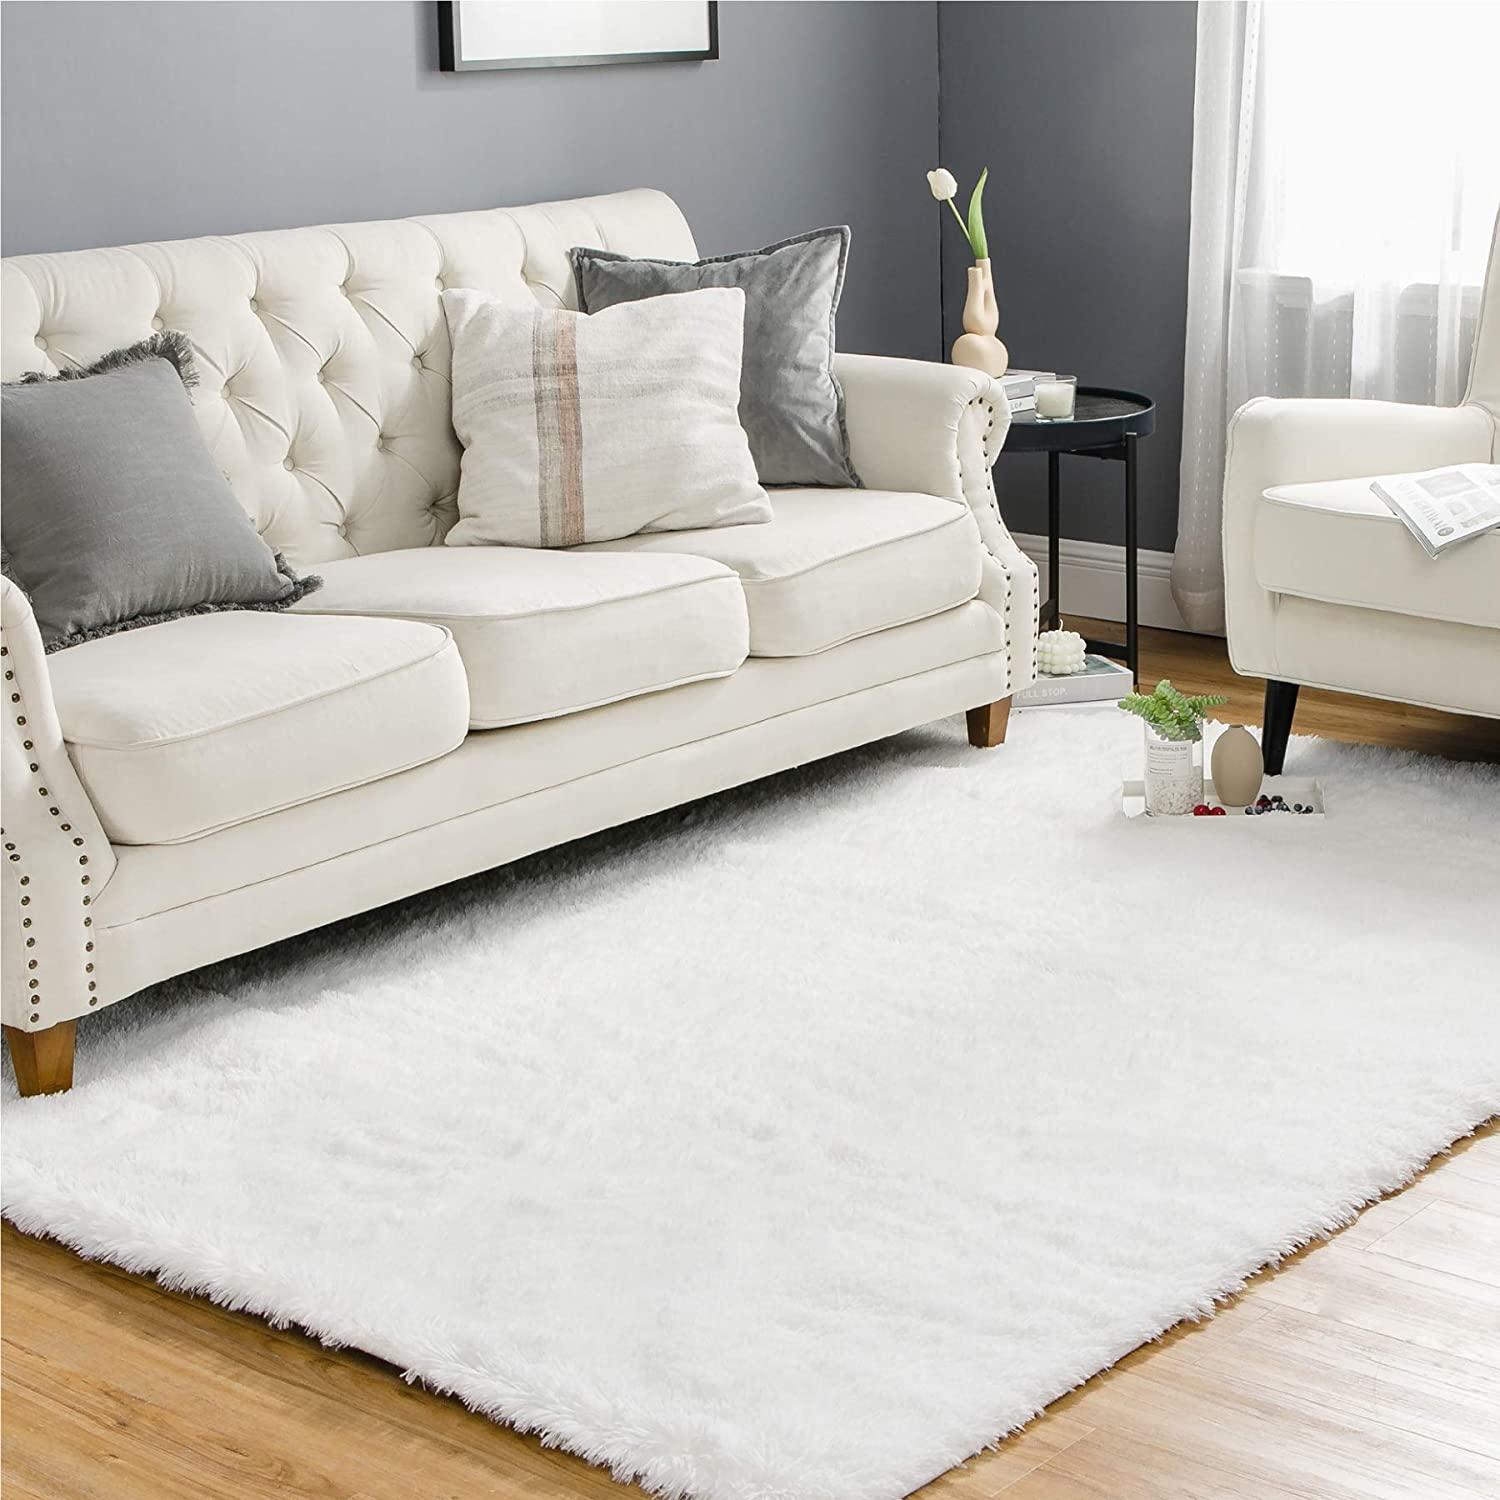 Bedsure Fluffy Area Rug for Living Room for $32.99 Shipped